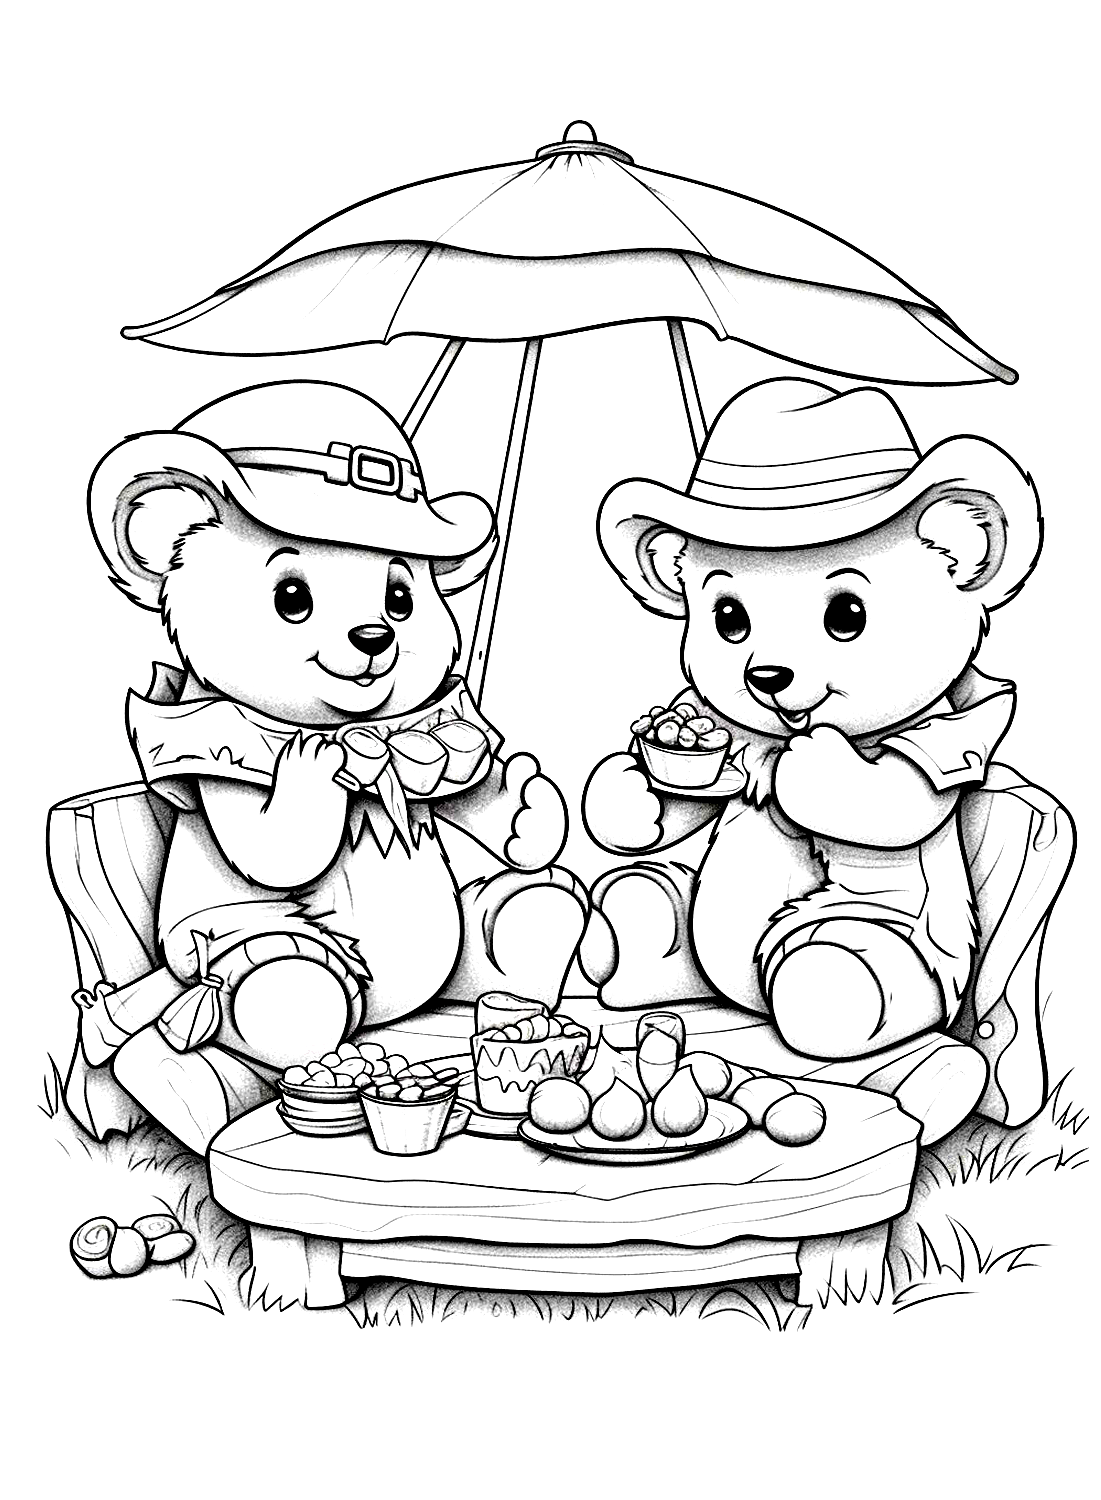 Coloring pages Teddy bears go to picnic